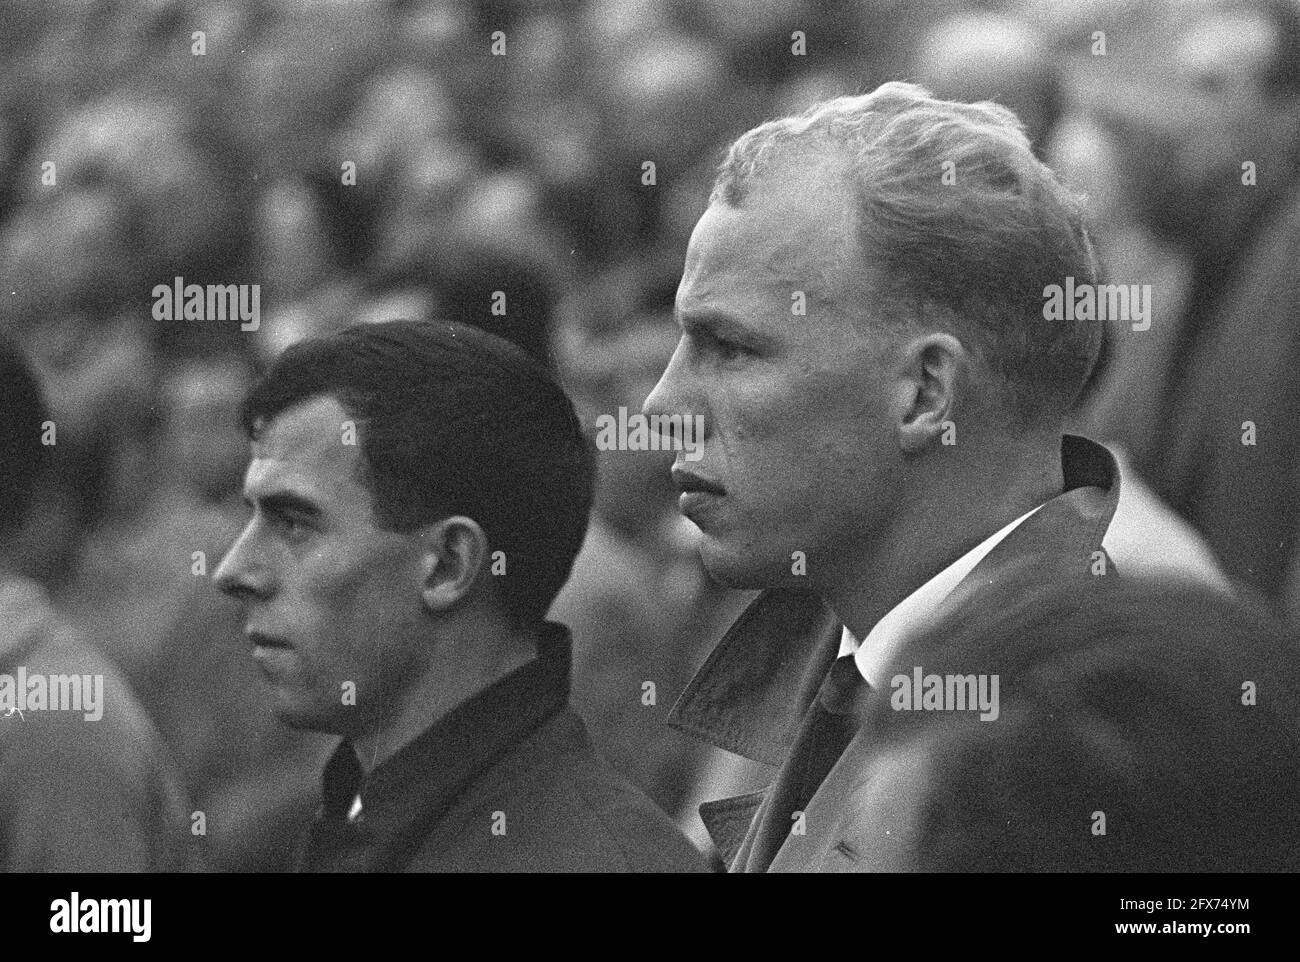 Coen Moulijn and Roel Wiersma during the playing of the national anthems, 21 October 1959, sports, soccer, The Netherlands, 20th century press agency photo, news to remember, documentary, historic photography 1945-1990, visual stories, human history of the Twentieth Century, capturing moments in time Stock Photo